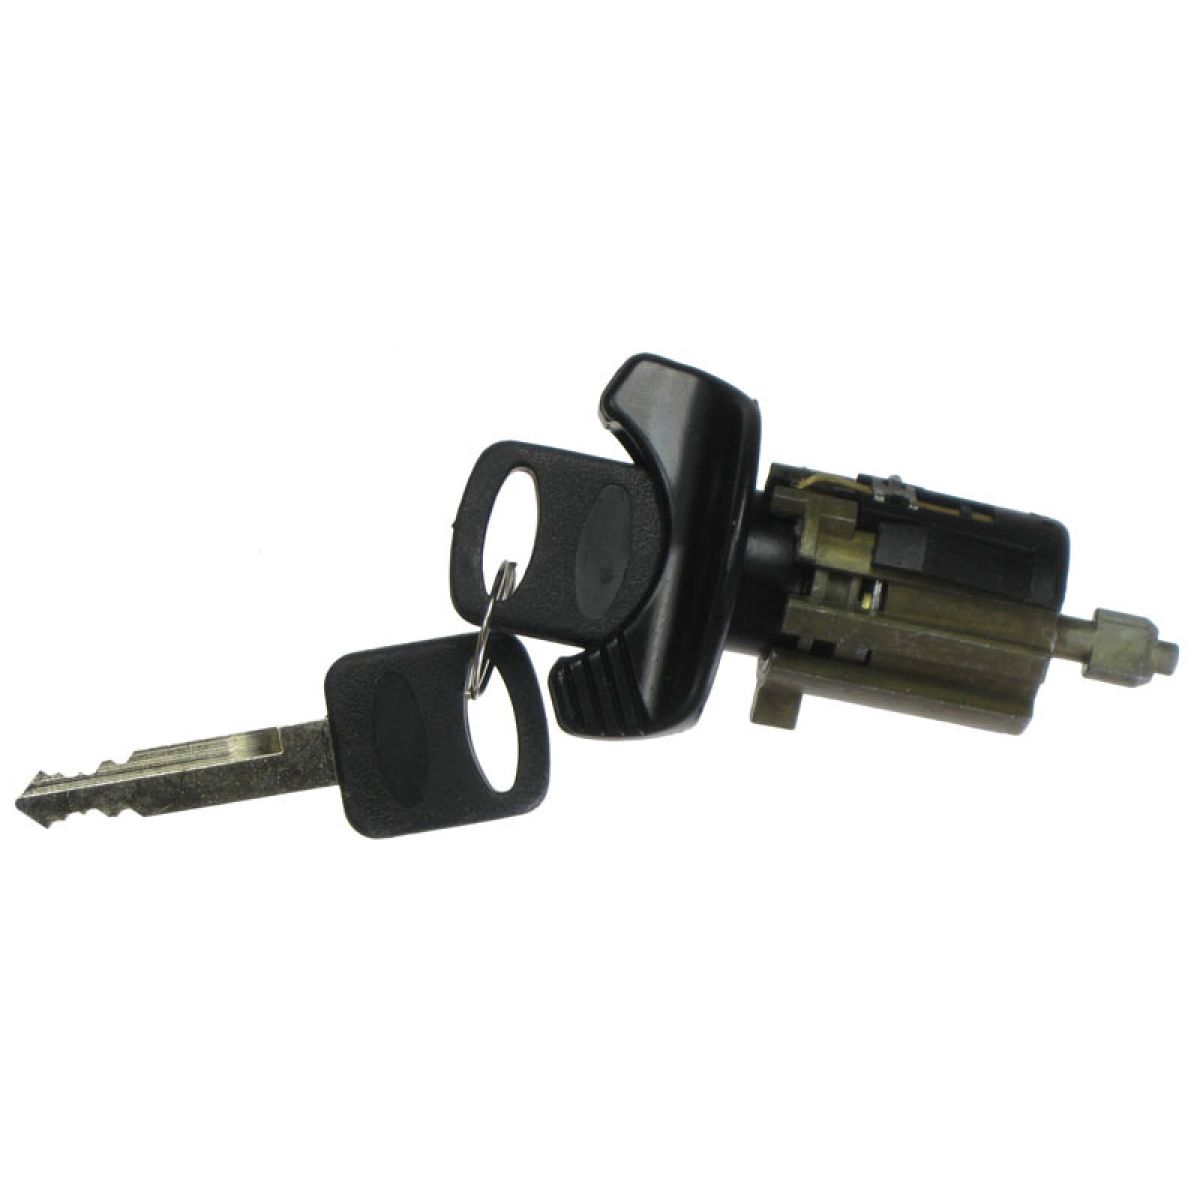 Ignition Lock Cylinder with Key for Ford Lincoln Mercury Models with ...